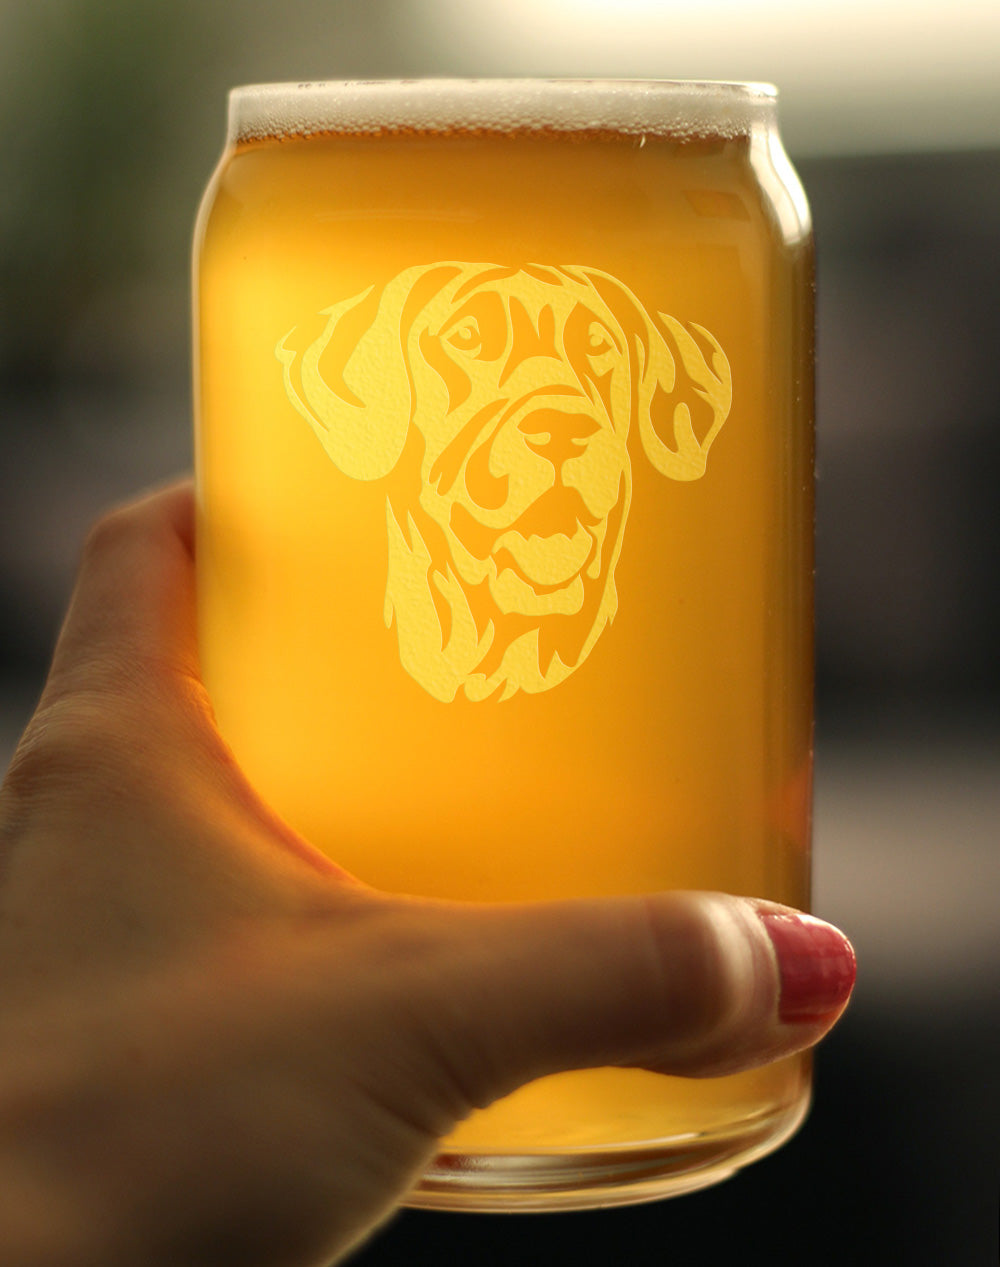 Great Dane Face Beer Can Pint Glass - Unique Dog Themed Decor and Gifts for Moms &amp; Dads of Great Danes - 16 Oz